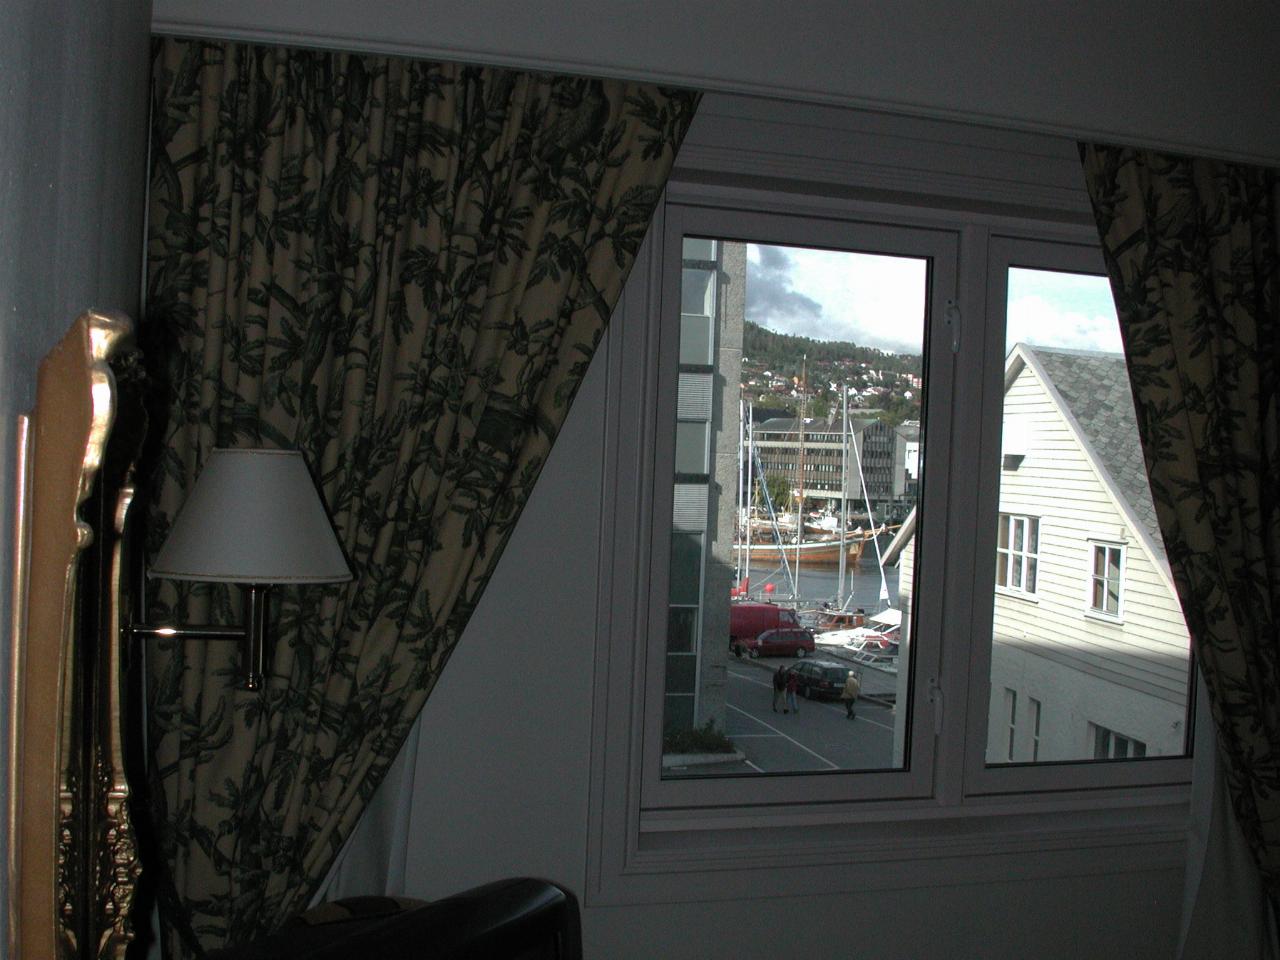 KPLU Viking Jazz: View from my room in the Rainbow Moldefjord Hotel in Molde, Norway.